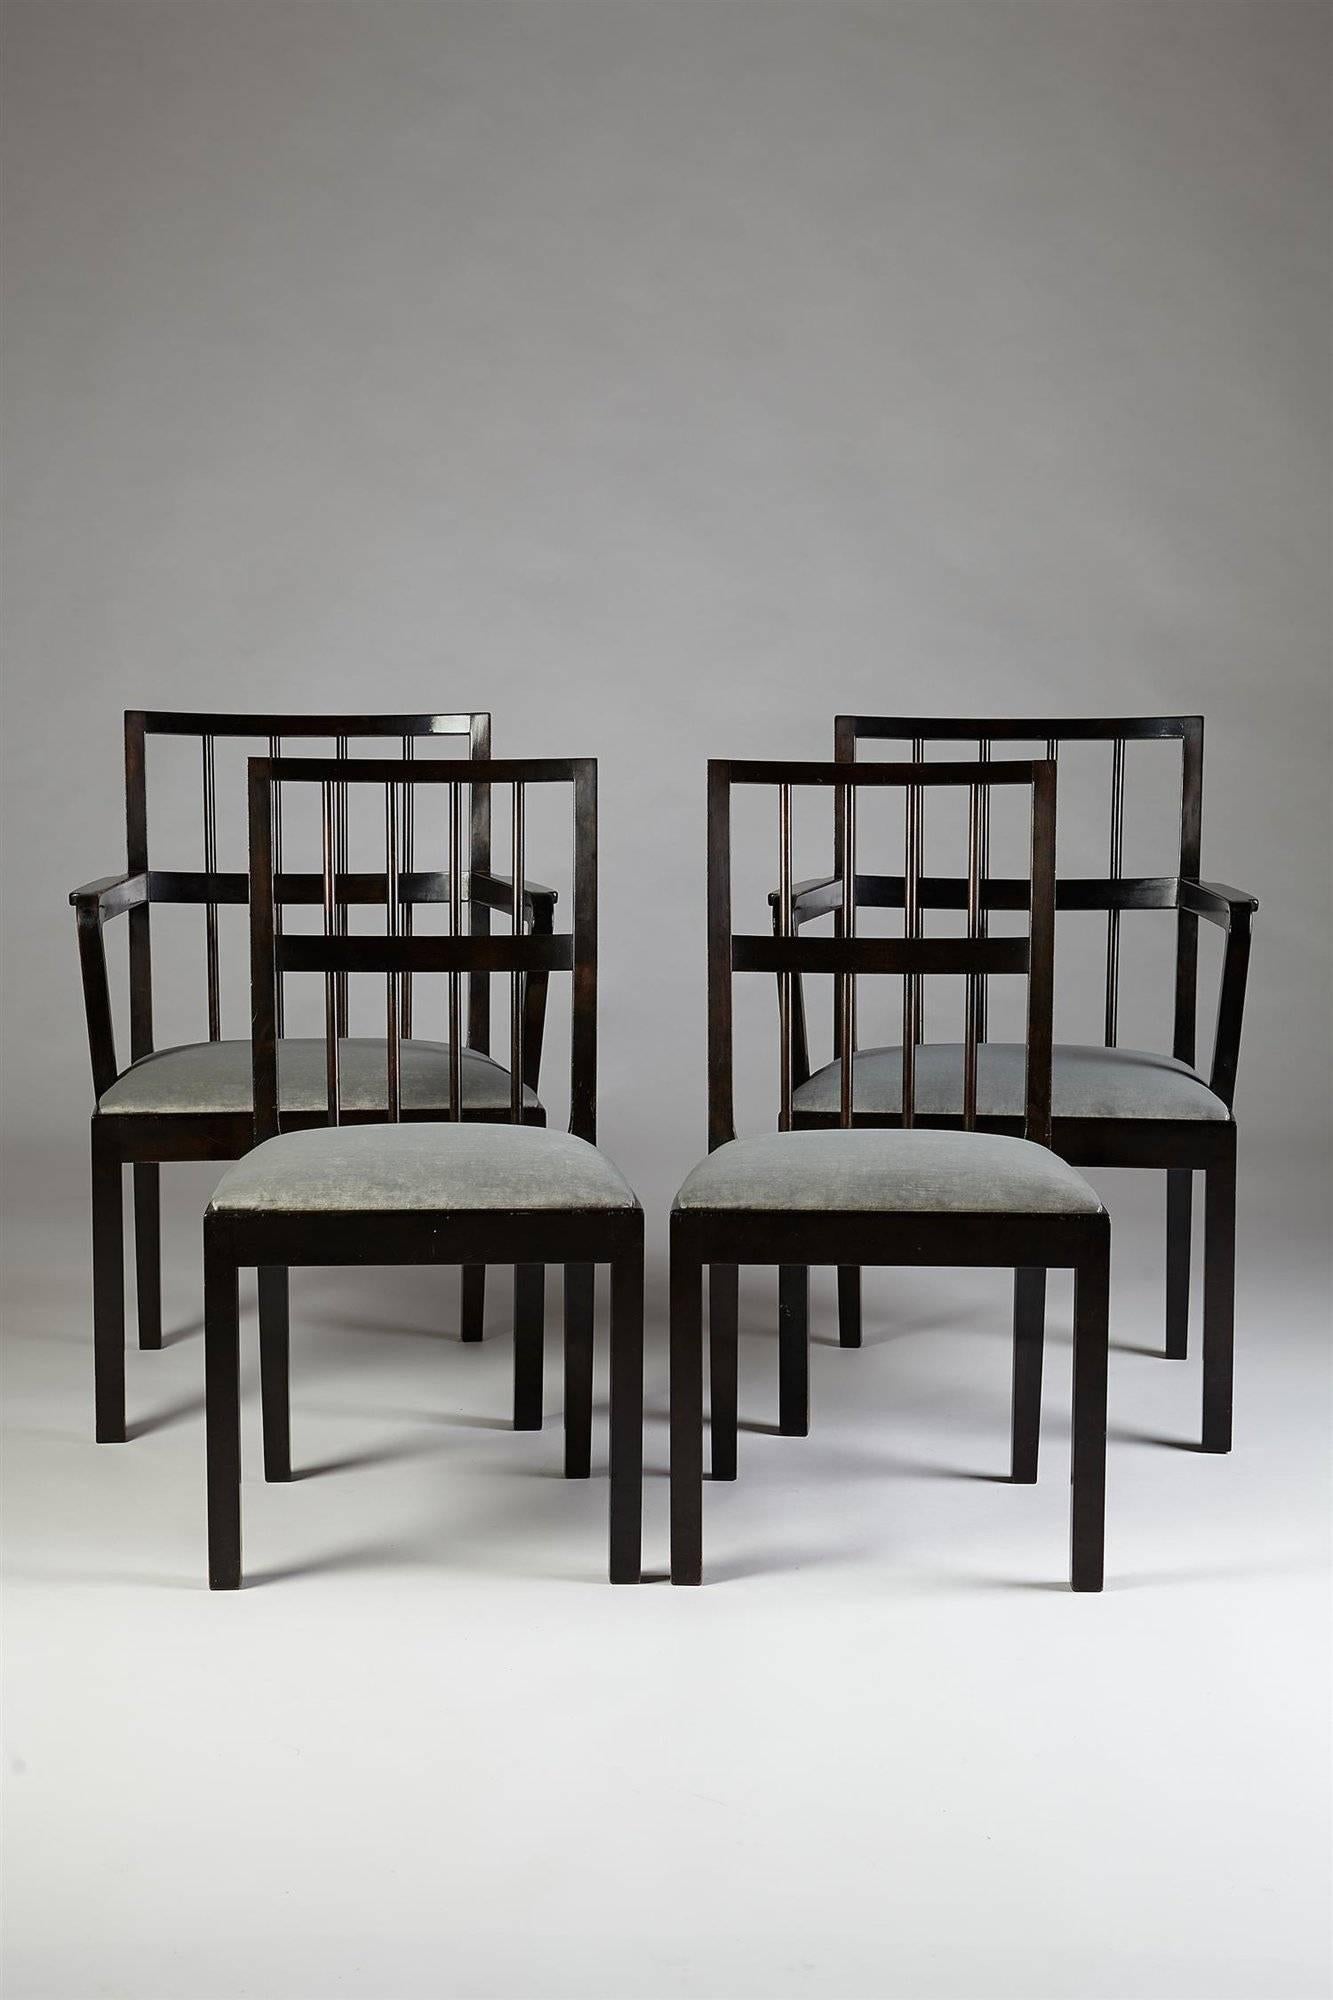 Set of four chairs, designed by Axel Einar Hjorth for NK, Sweden, 1930s.

Stained birch and velvet.

Further measurements below.